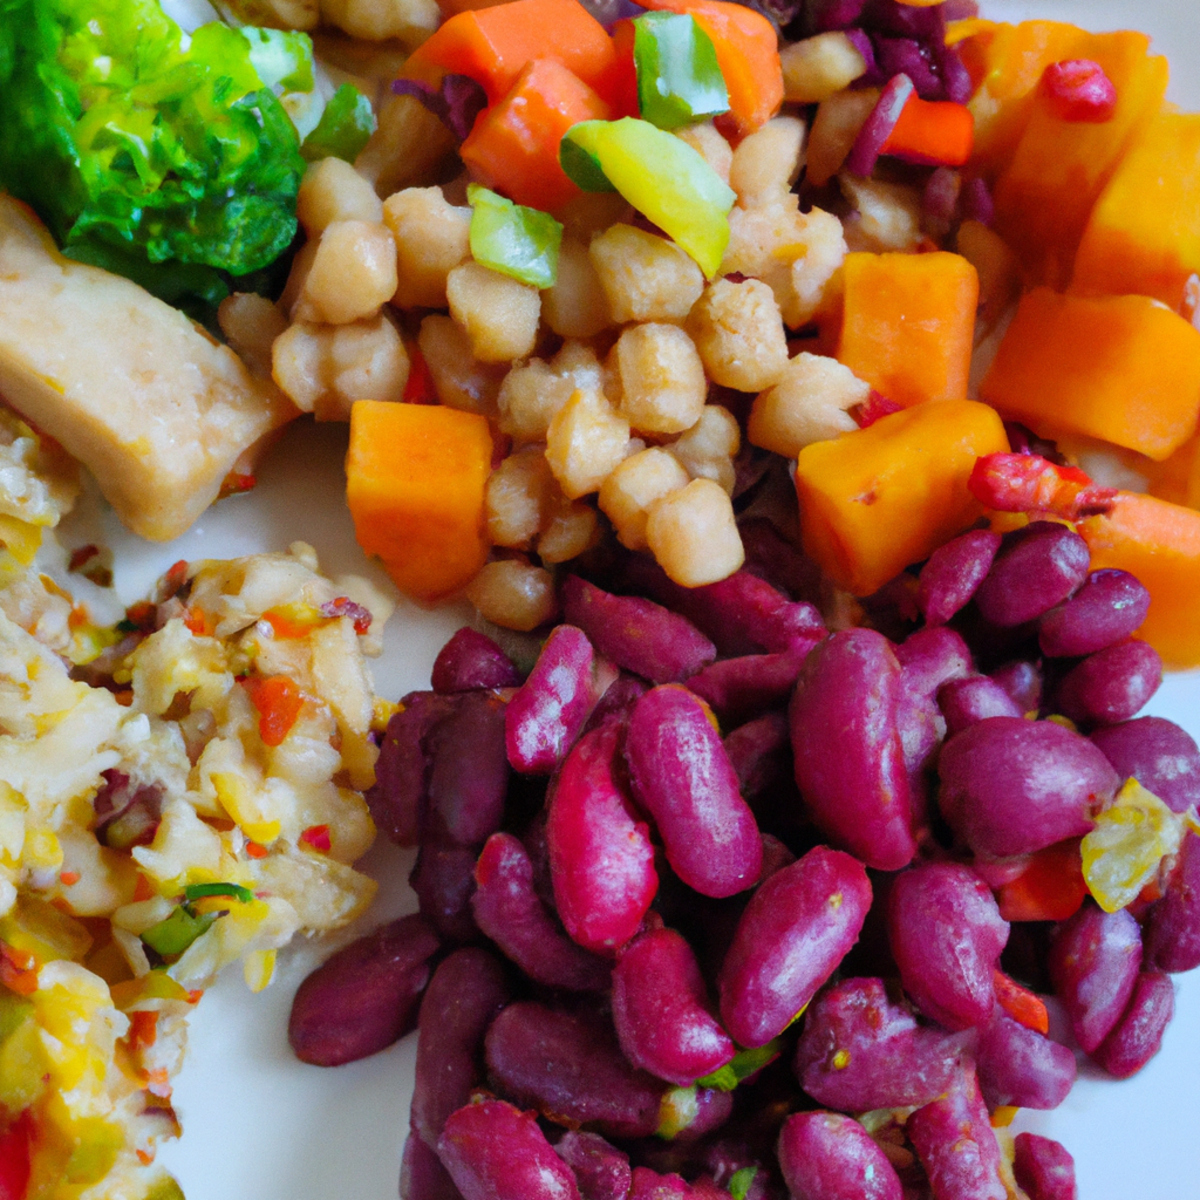 Colorful and nutritious gluten-free plate with fresh vegetables, fruits, grains, and legumes, promoting a balanced diet for eosinophilic gastroenteritis.